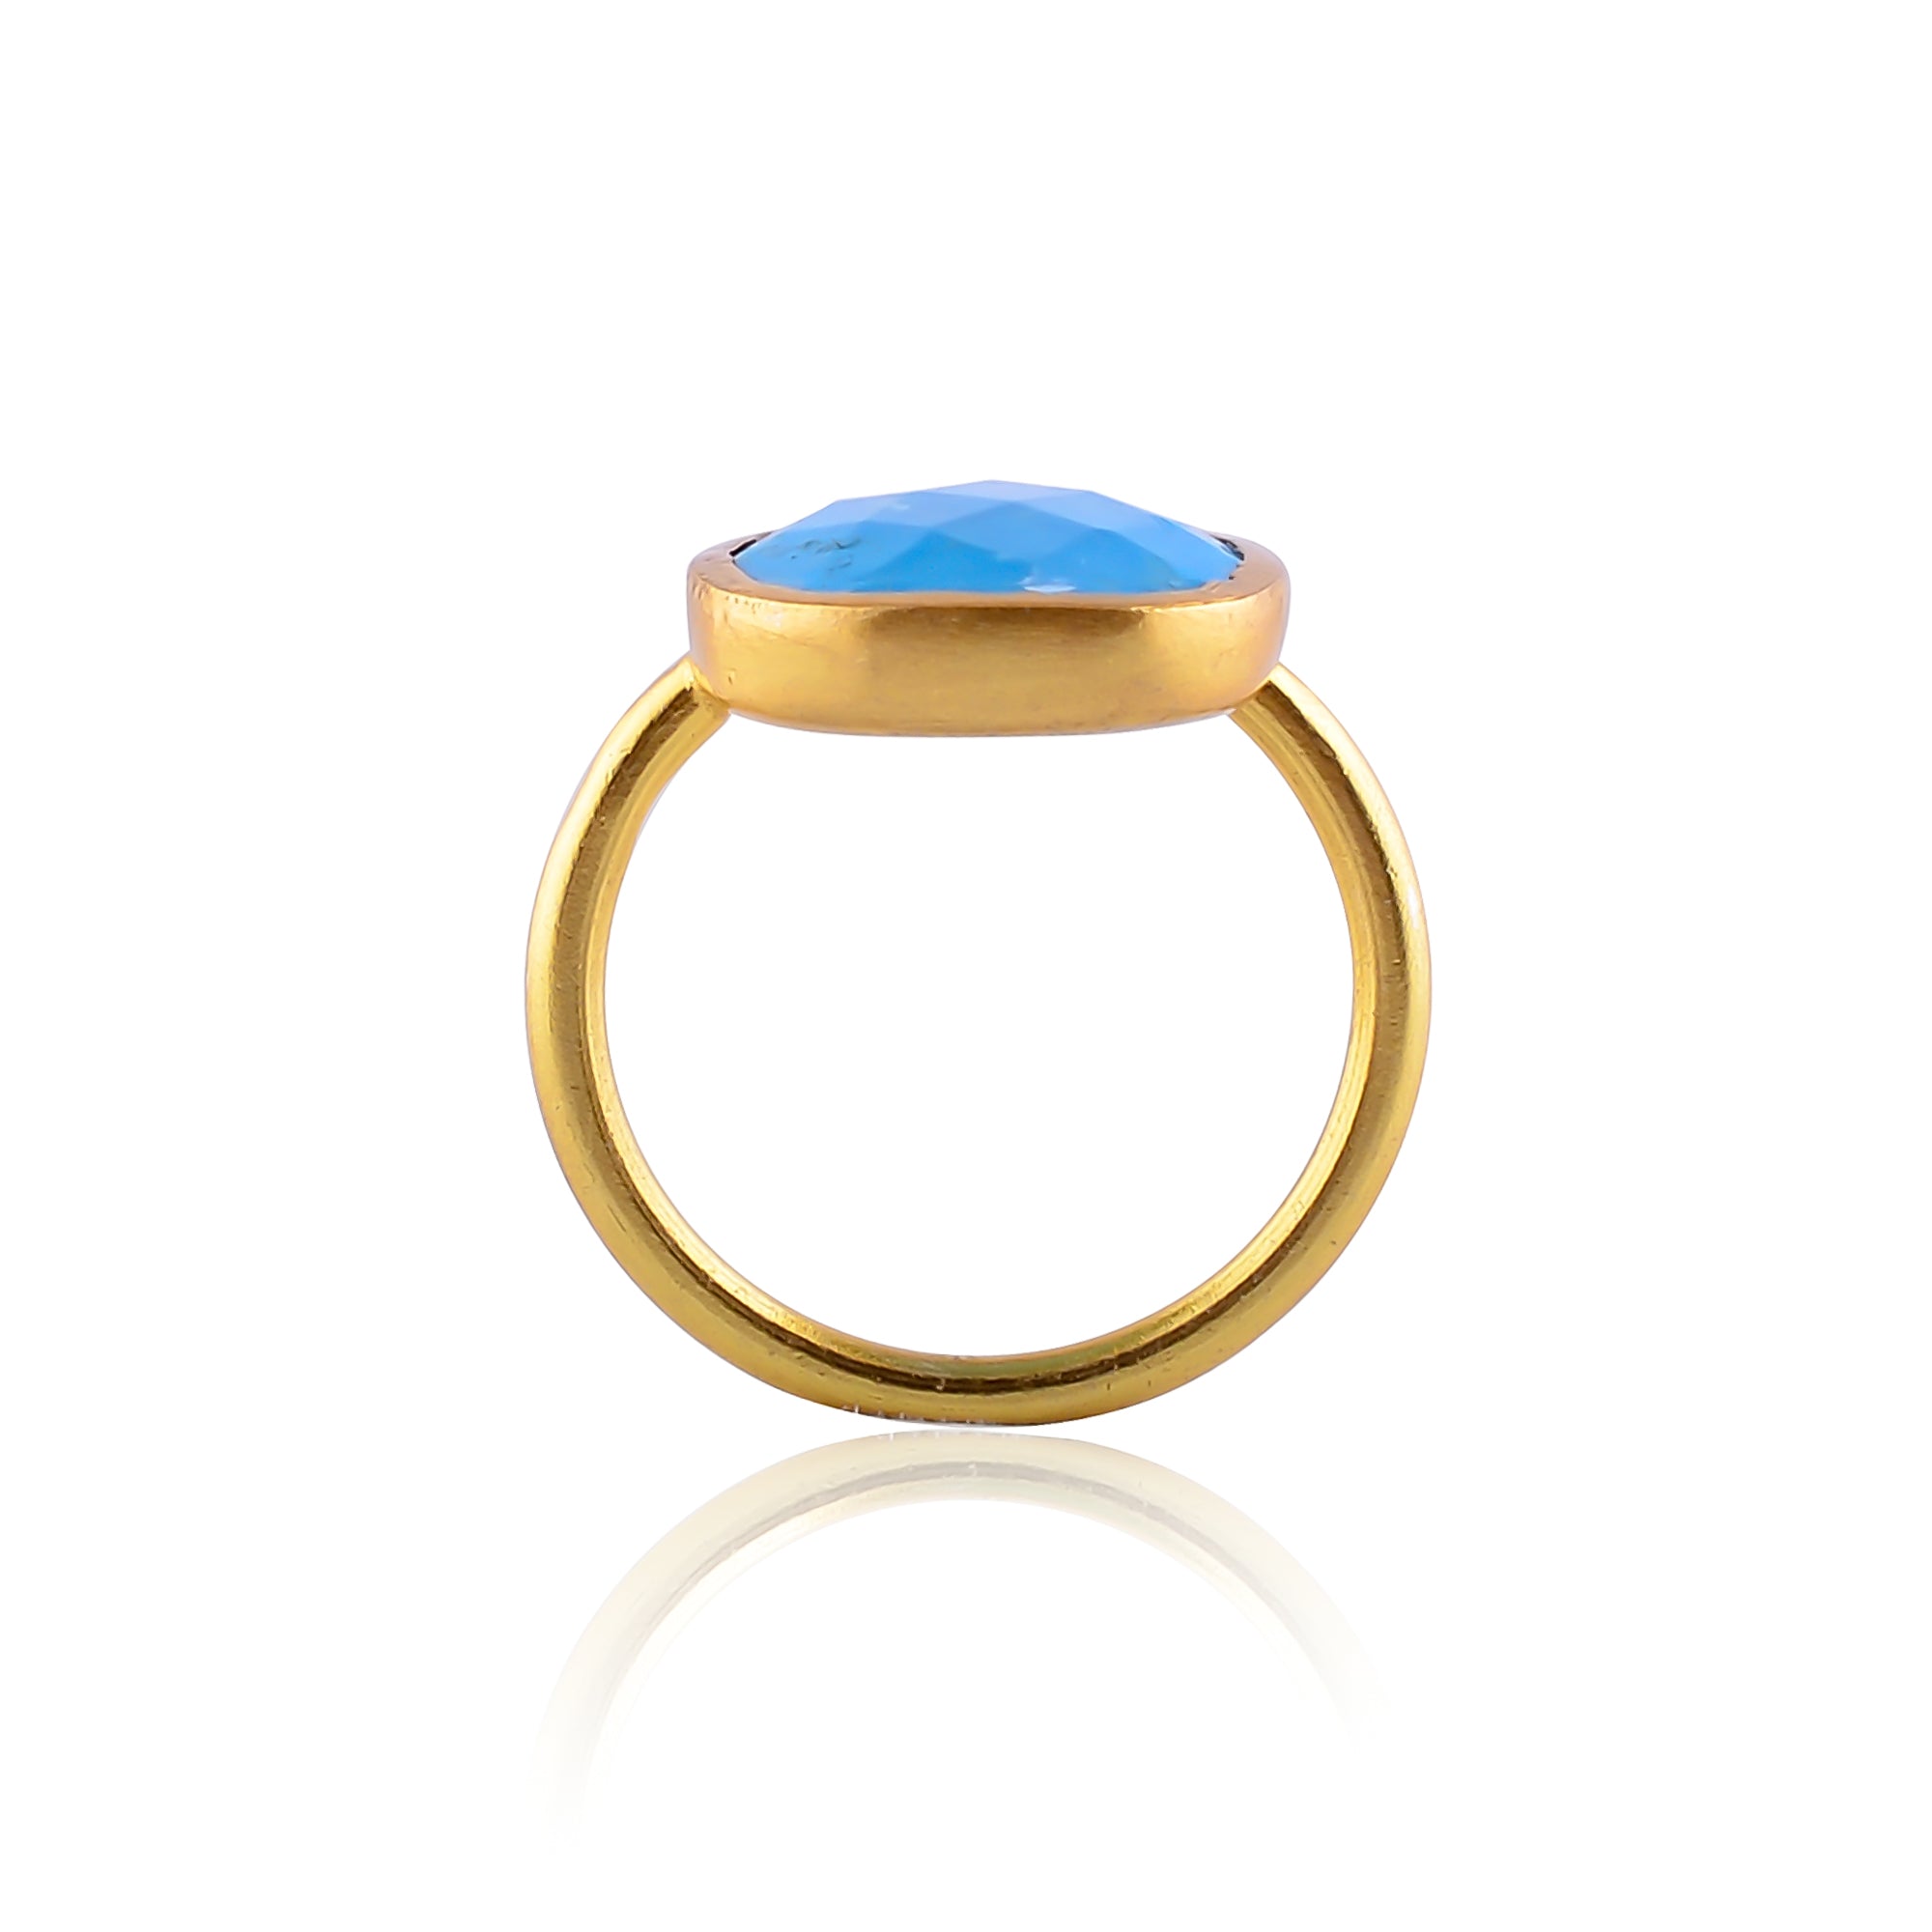 Buy Handcrafted Silver Gold Plated Turquoise Ring